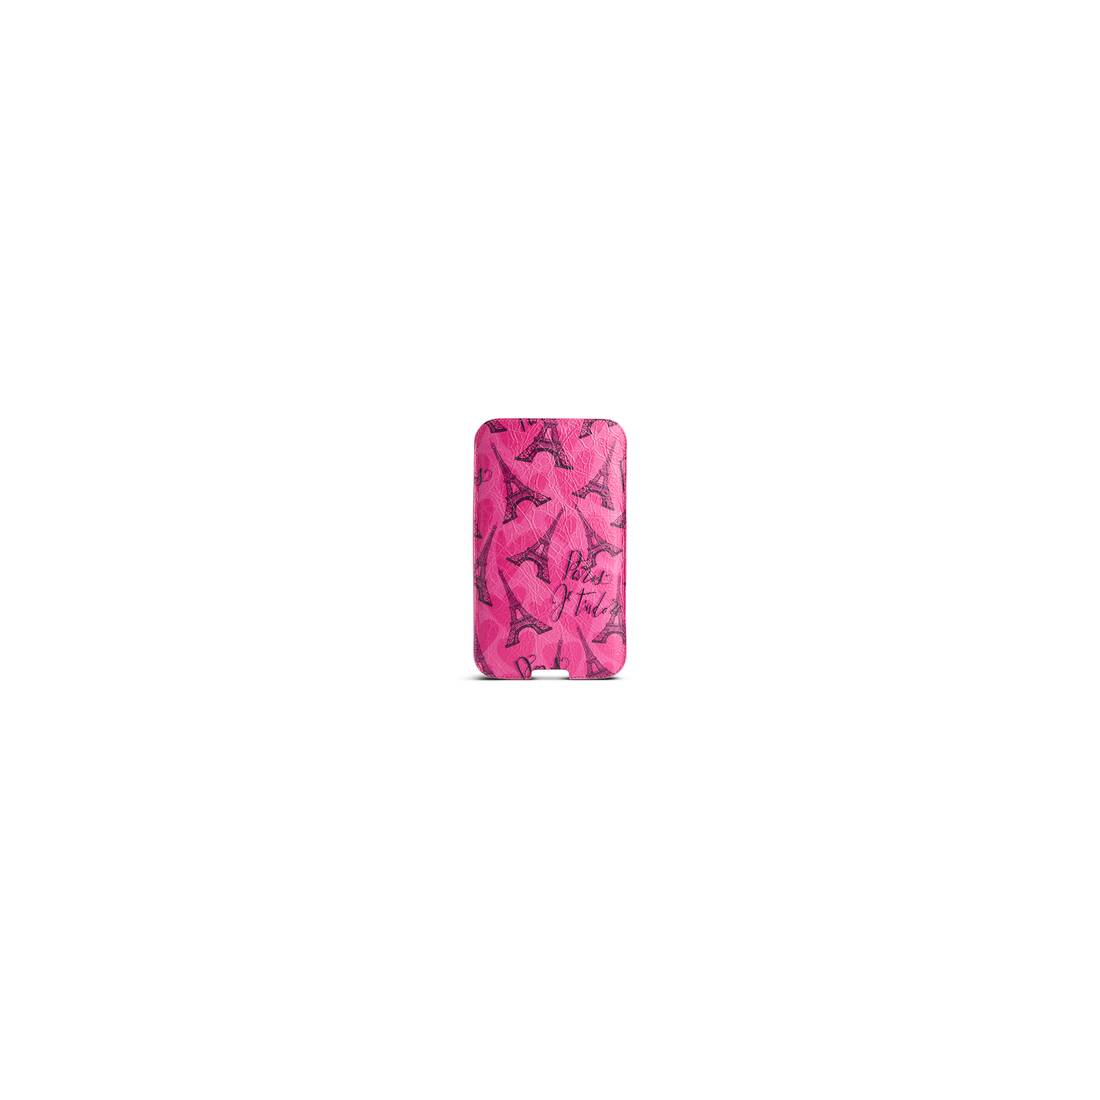 Cash Phone Pouch in Pink